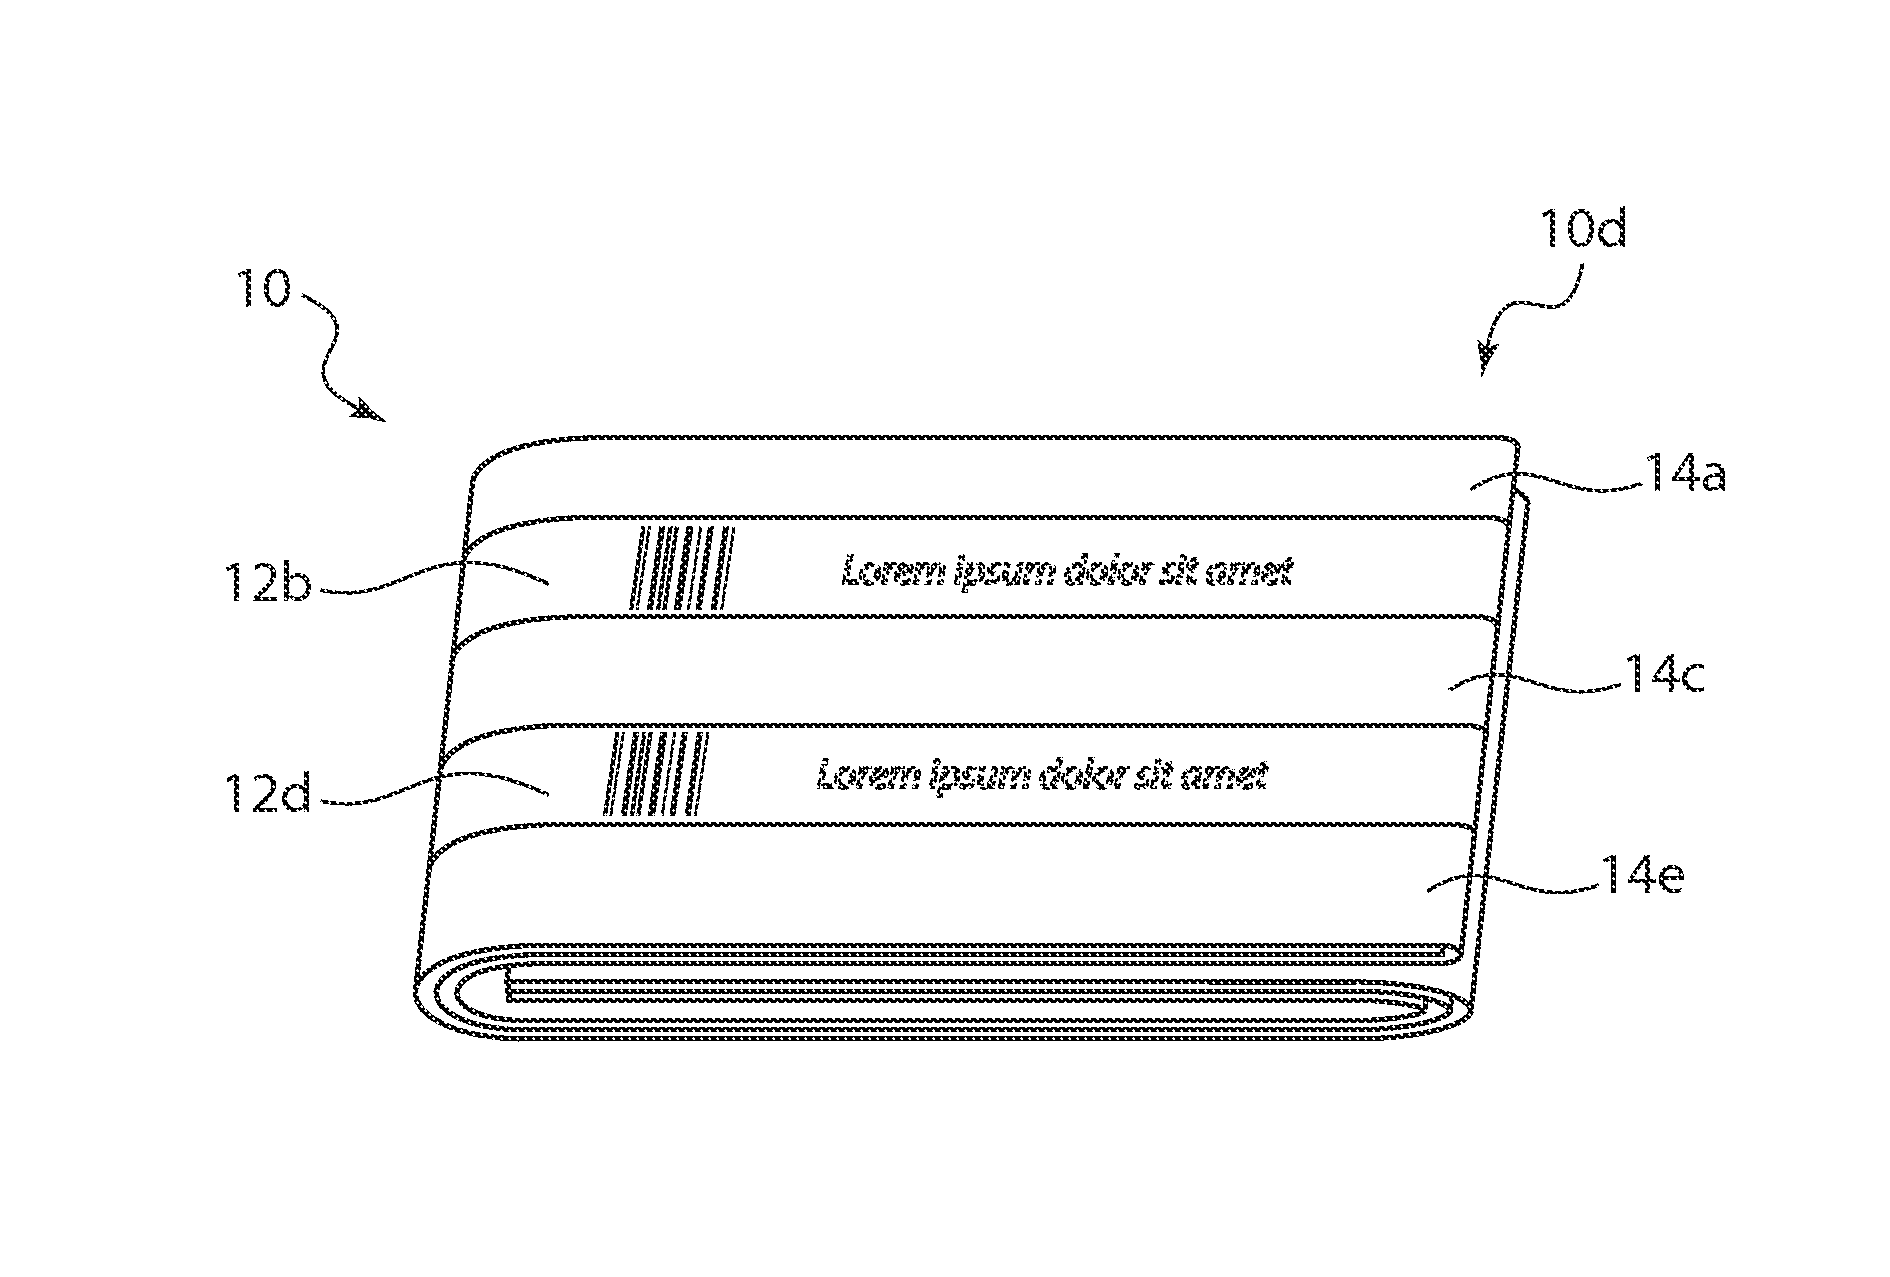 Method for manufacturing extended content booklet labels